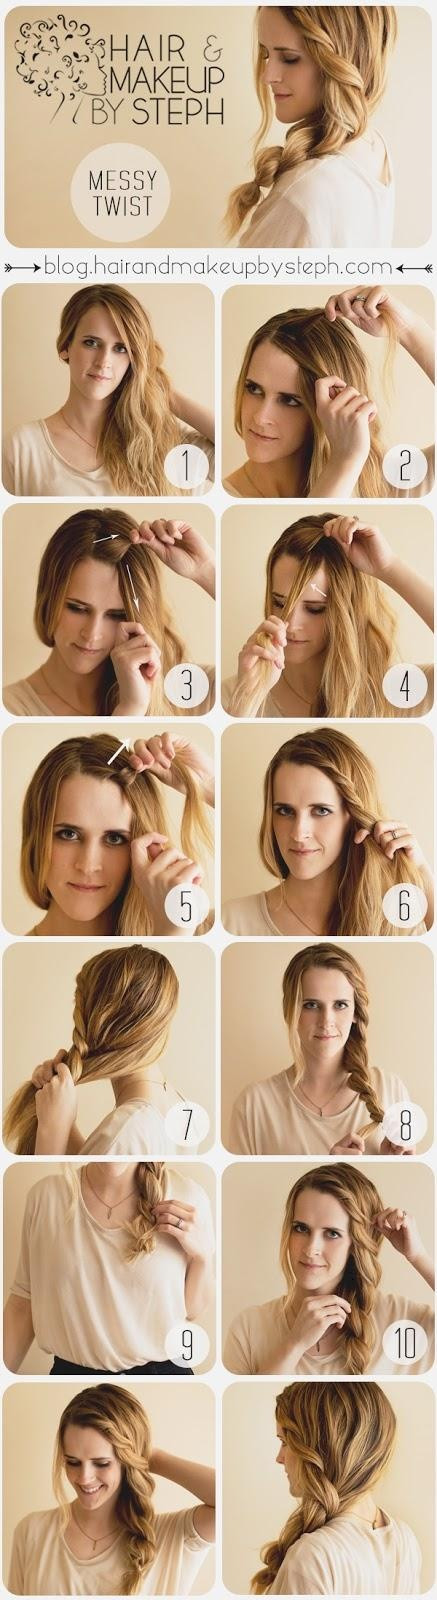 Easy Messy Hairstyles
 15 Super Easy Hairstyles With Tutorials Pretty Designs